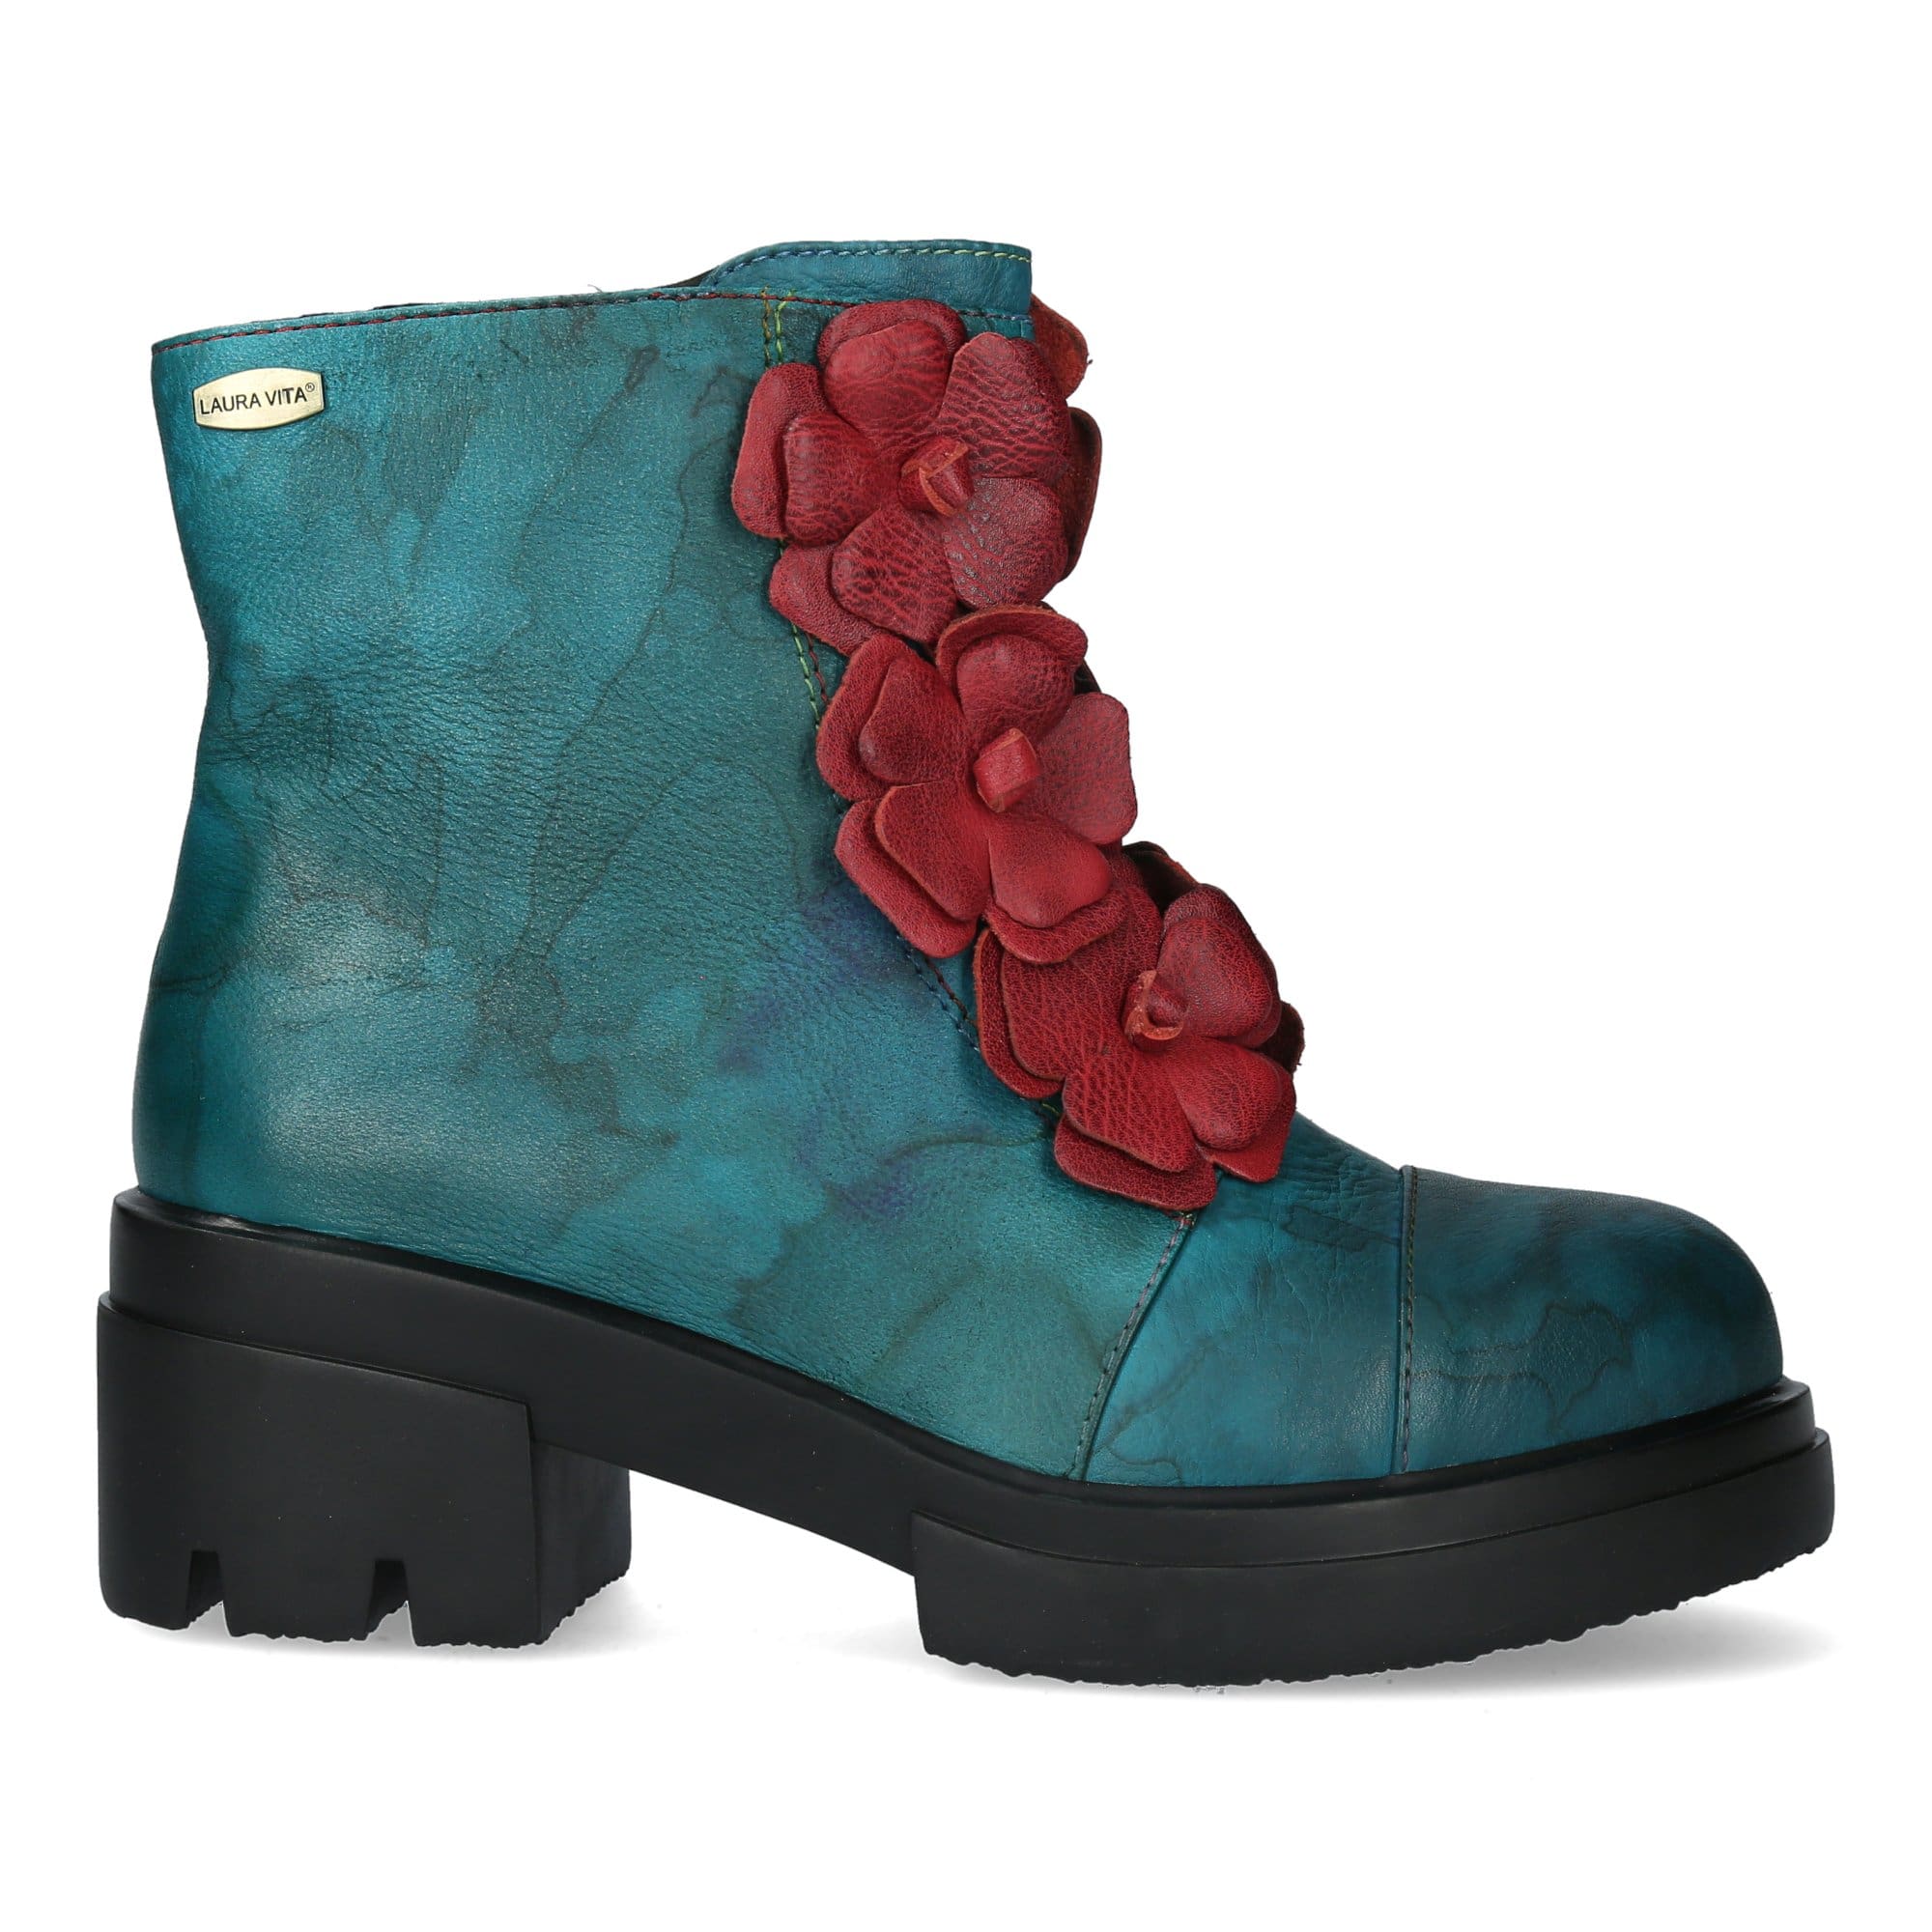 GOCNEO 66 nature shoe - 35 / Turquoise - Boots